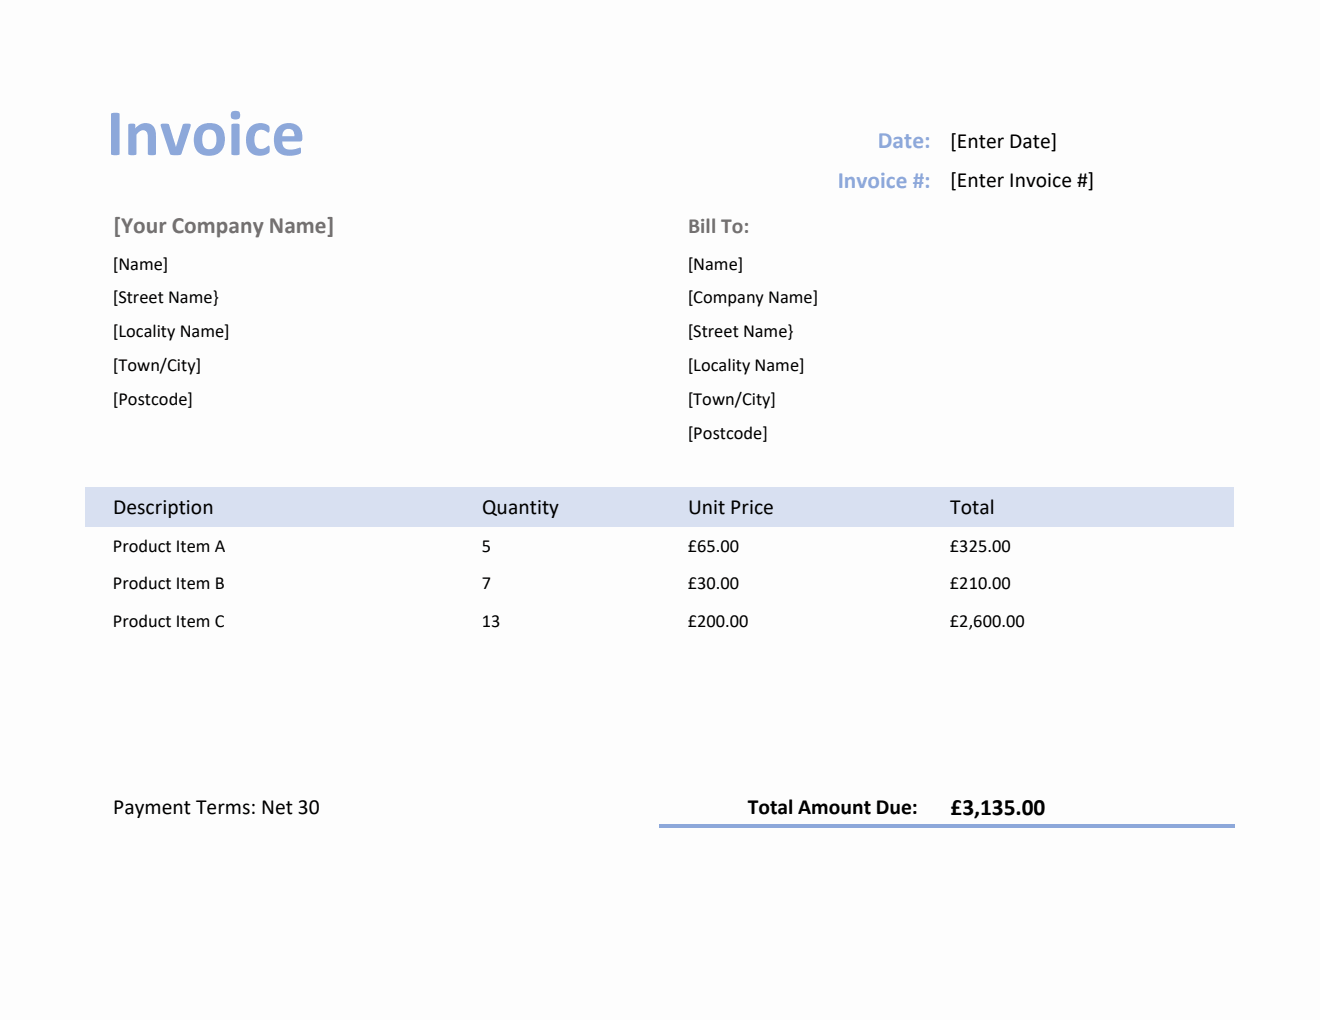 Invoice Template for U.K. in Excel (Purple)